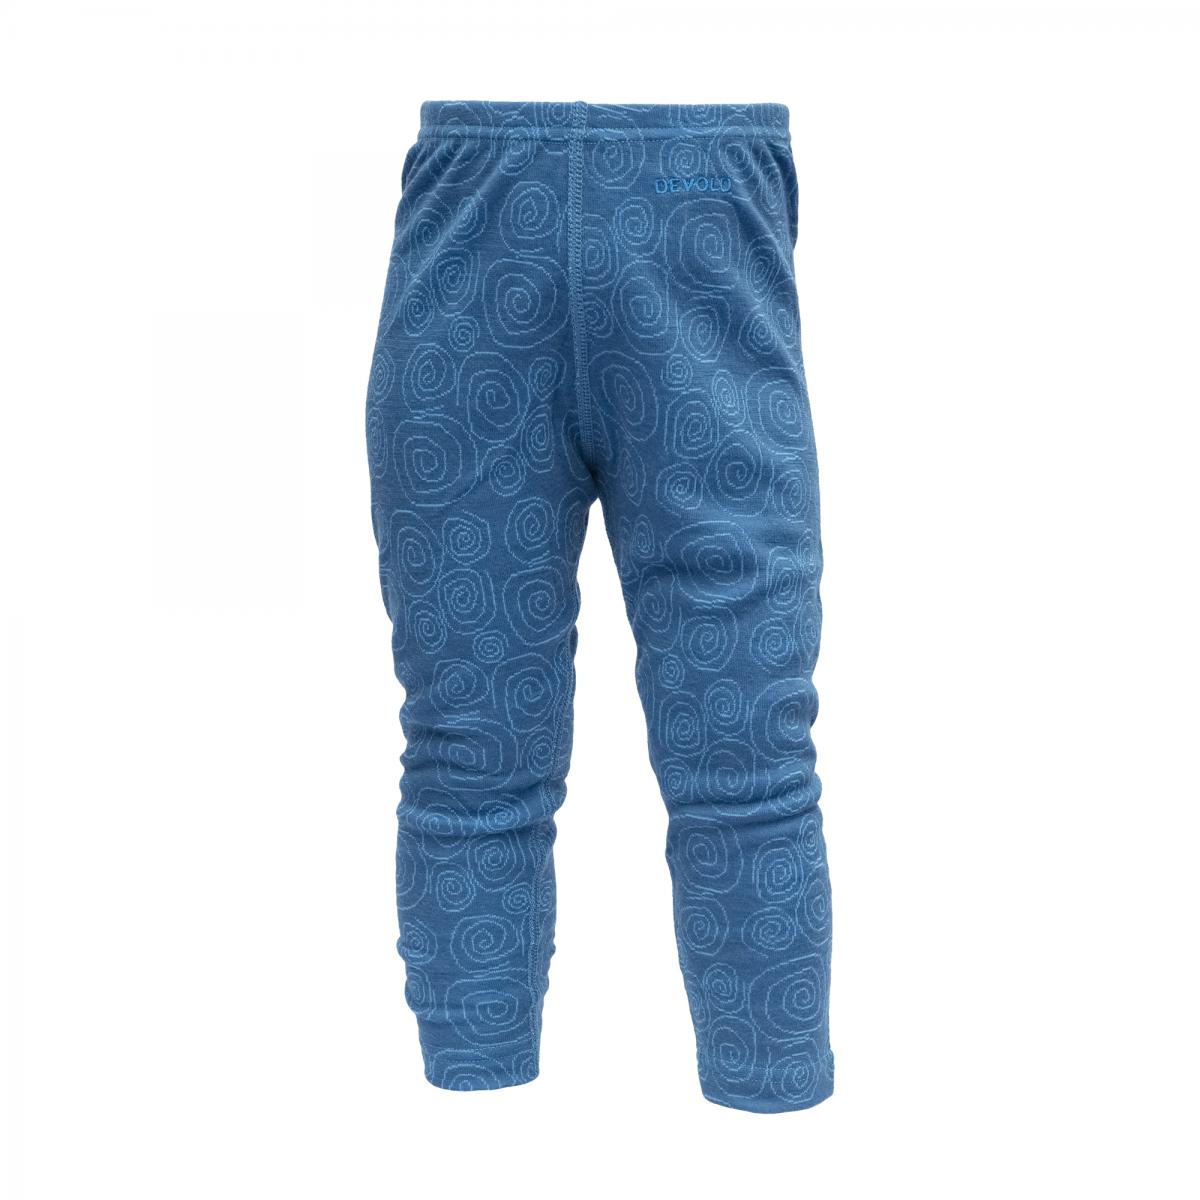 Duo Active Baby Long Johns, Blue